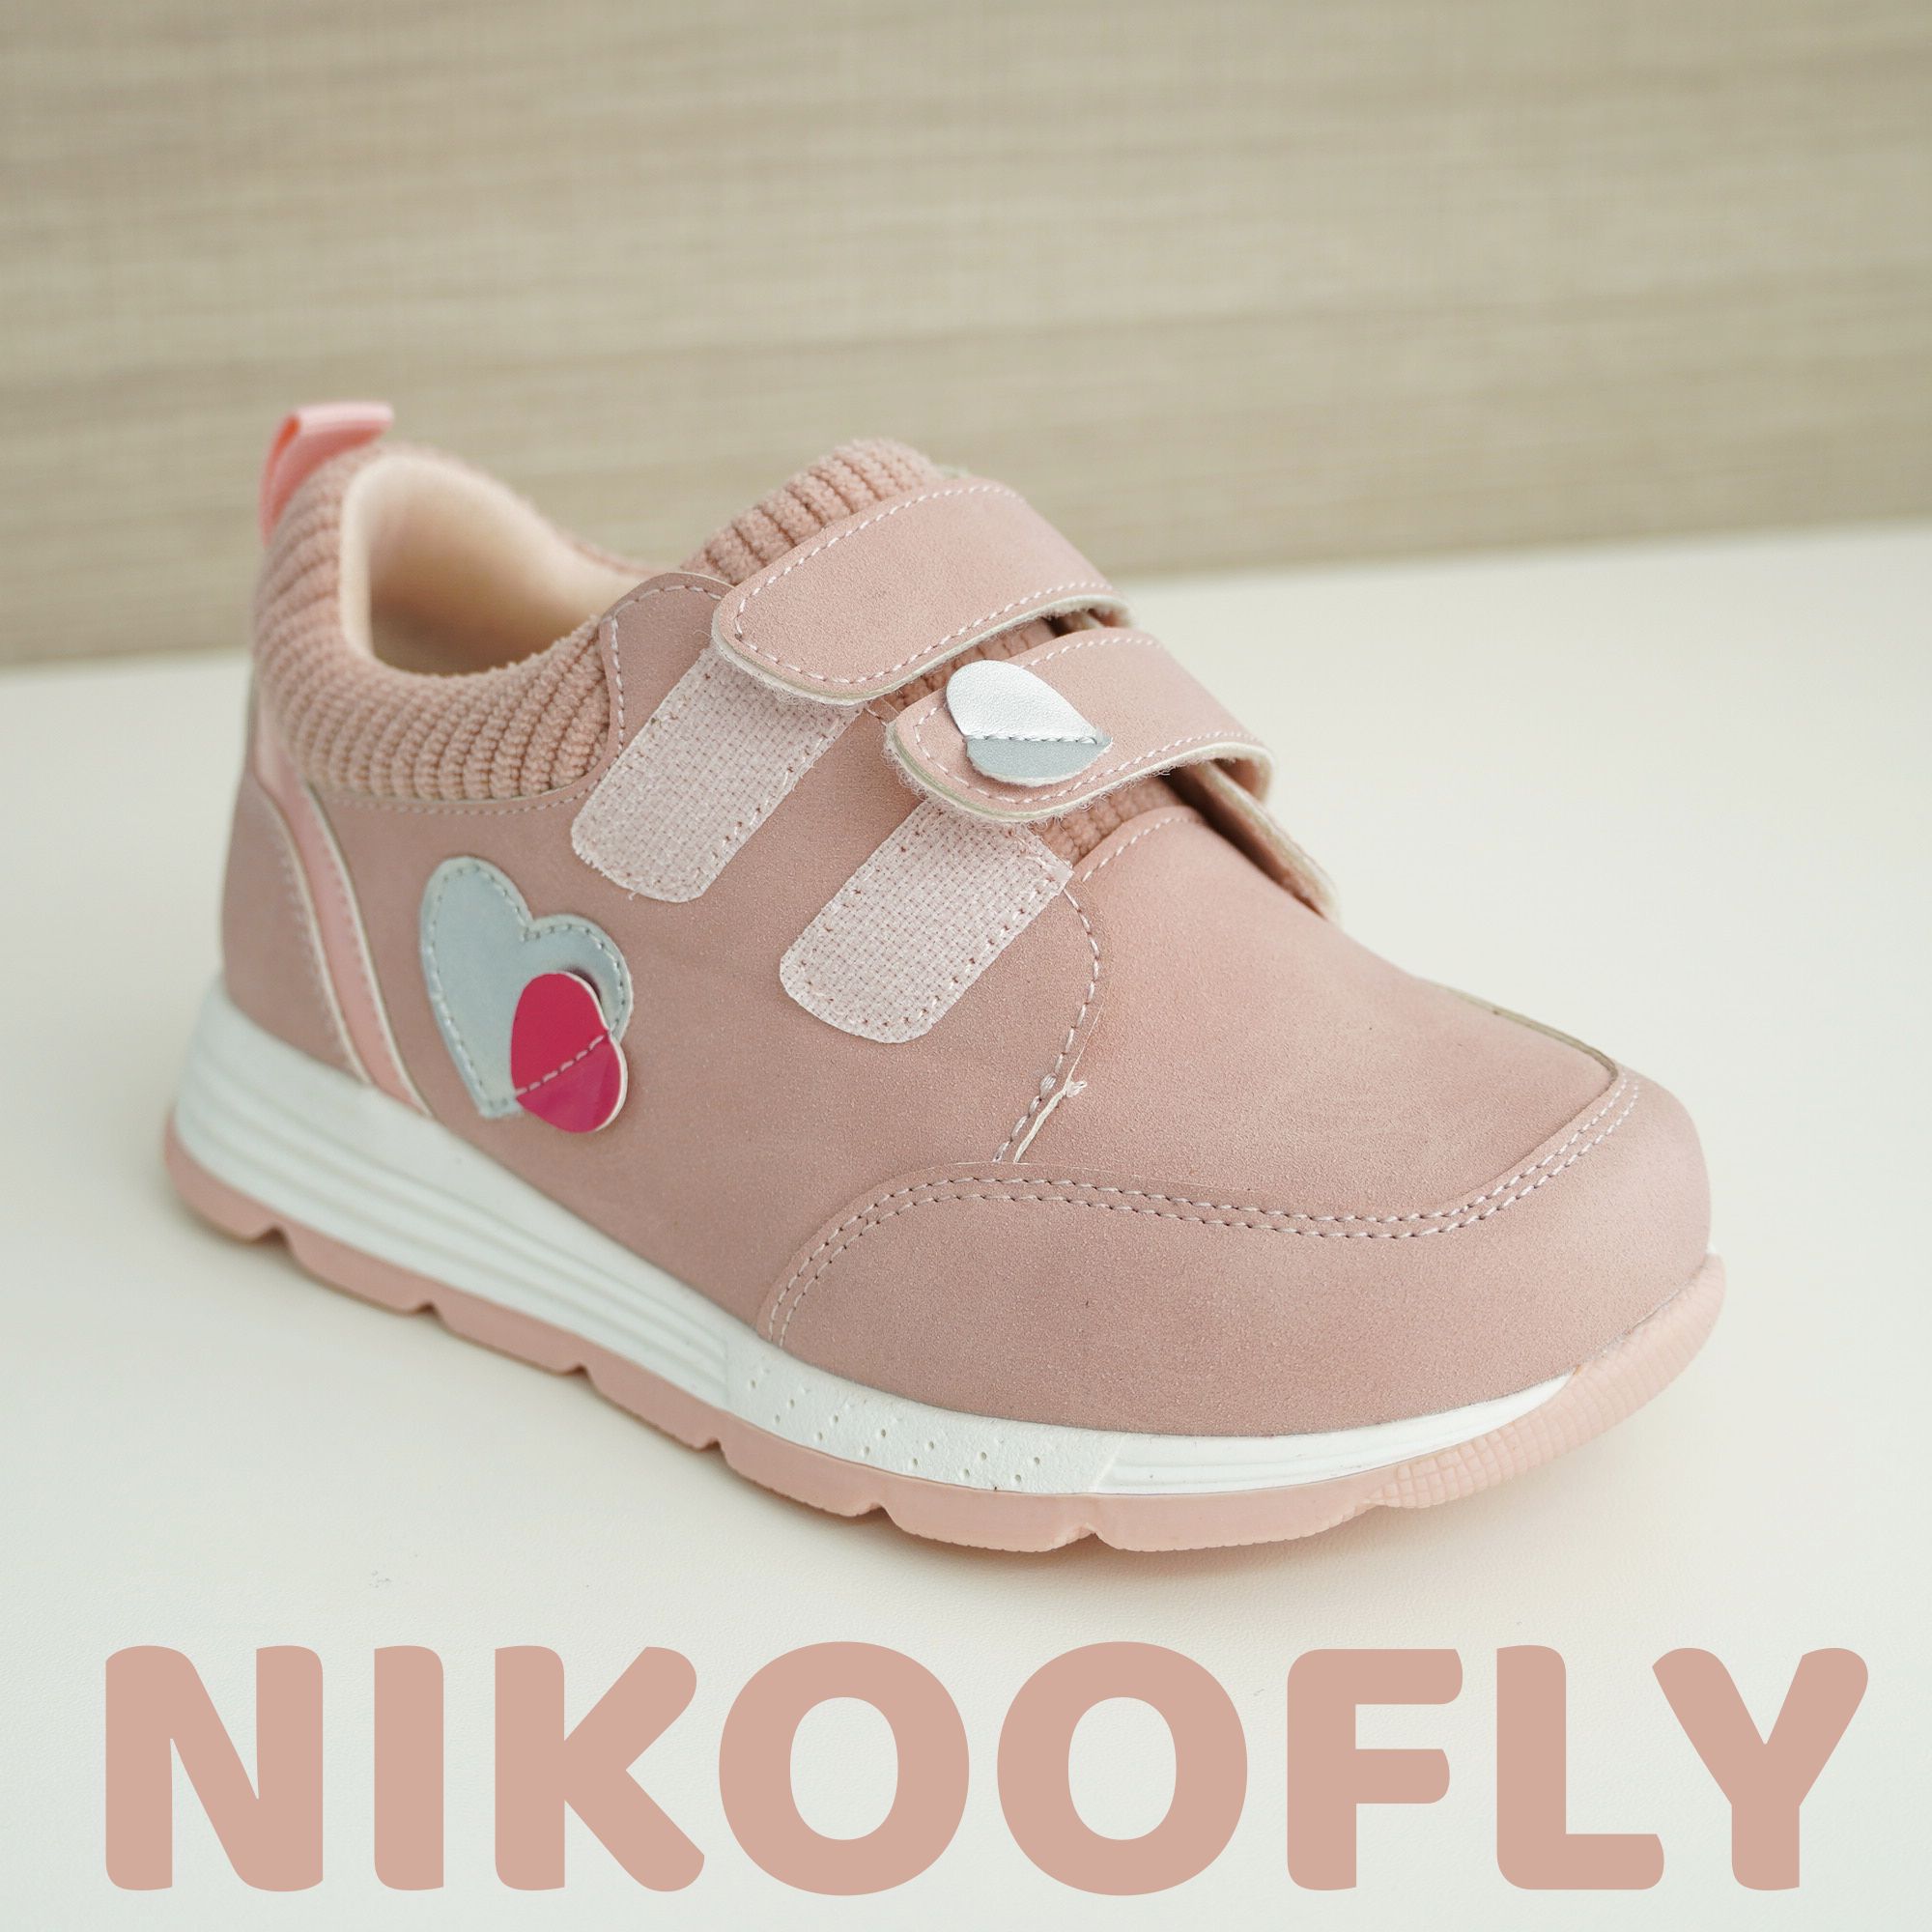 2023-new-style-Women's-fashion-heart-pattern-outdoor-sports-casual-shoes-HSA2022A-5-Dusty-Rose-Pink